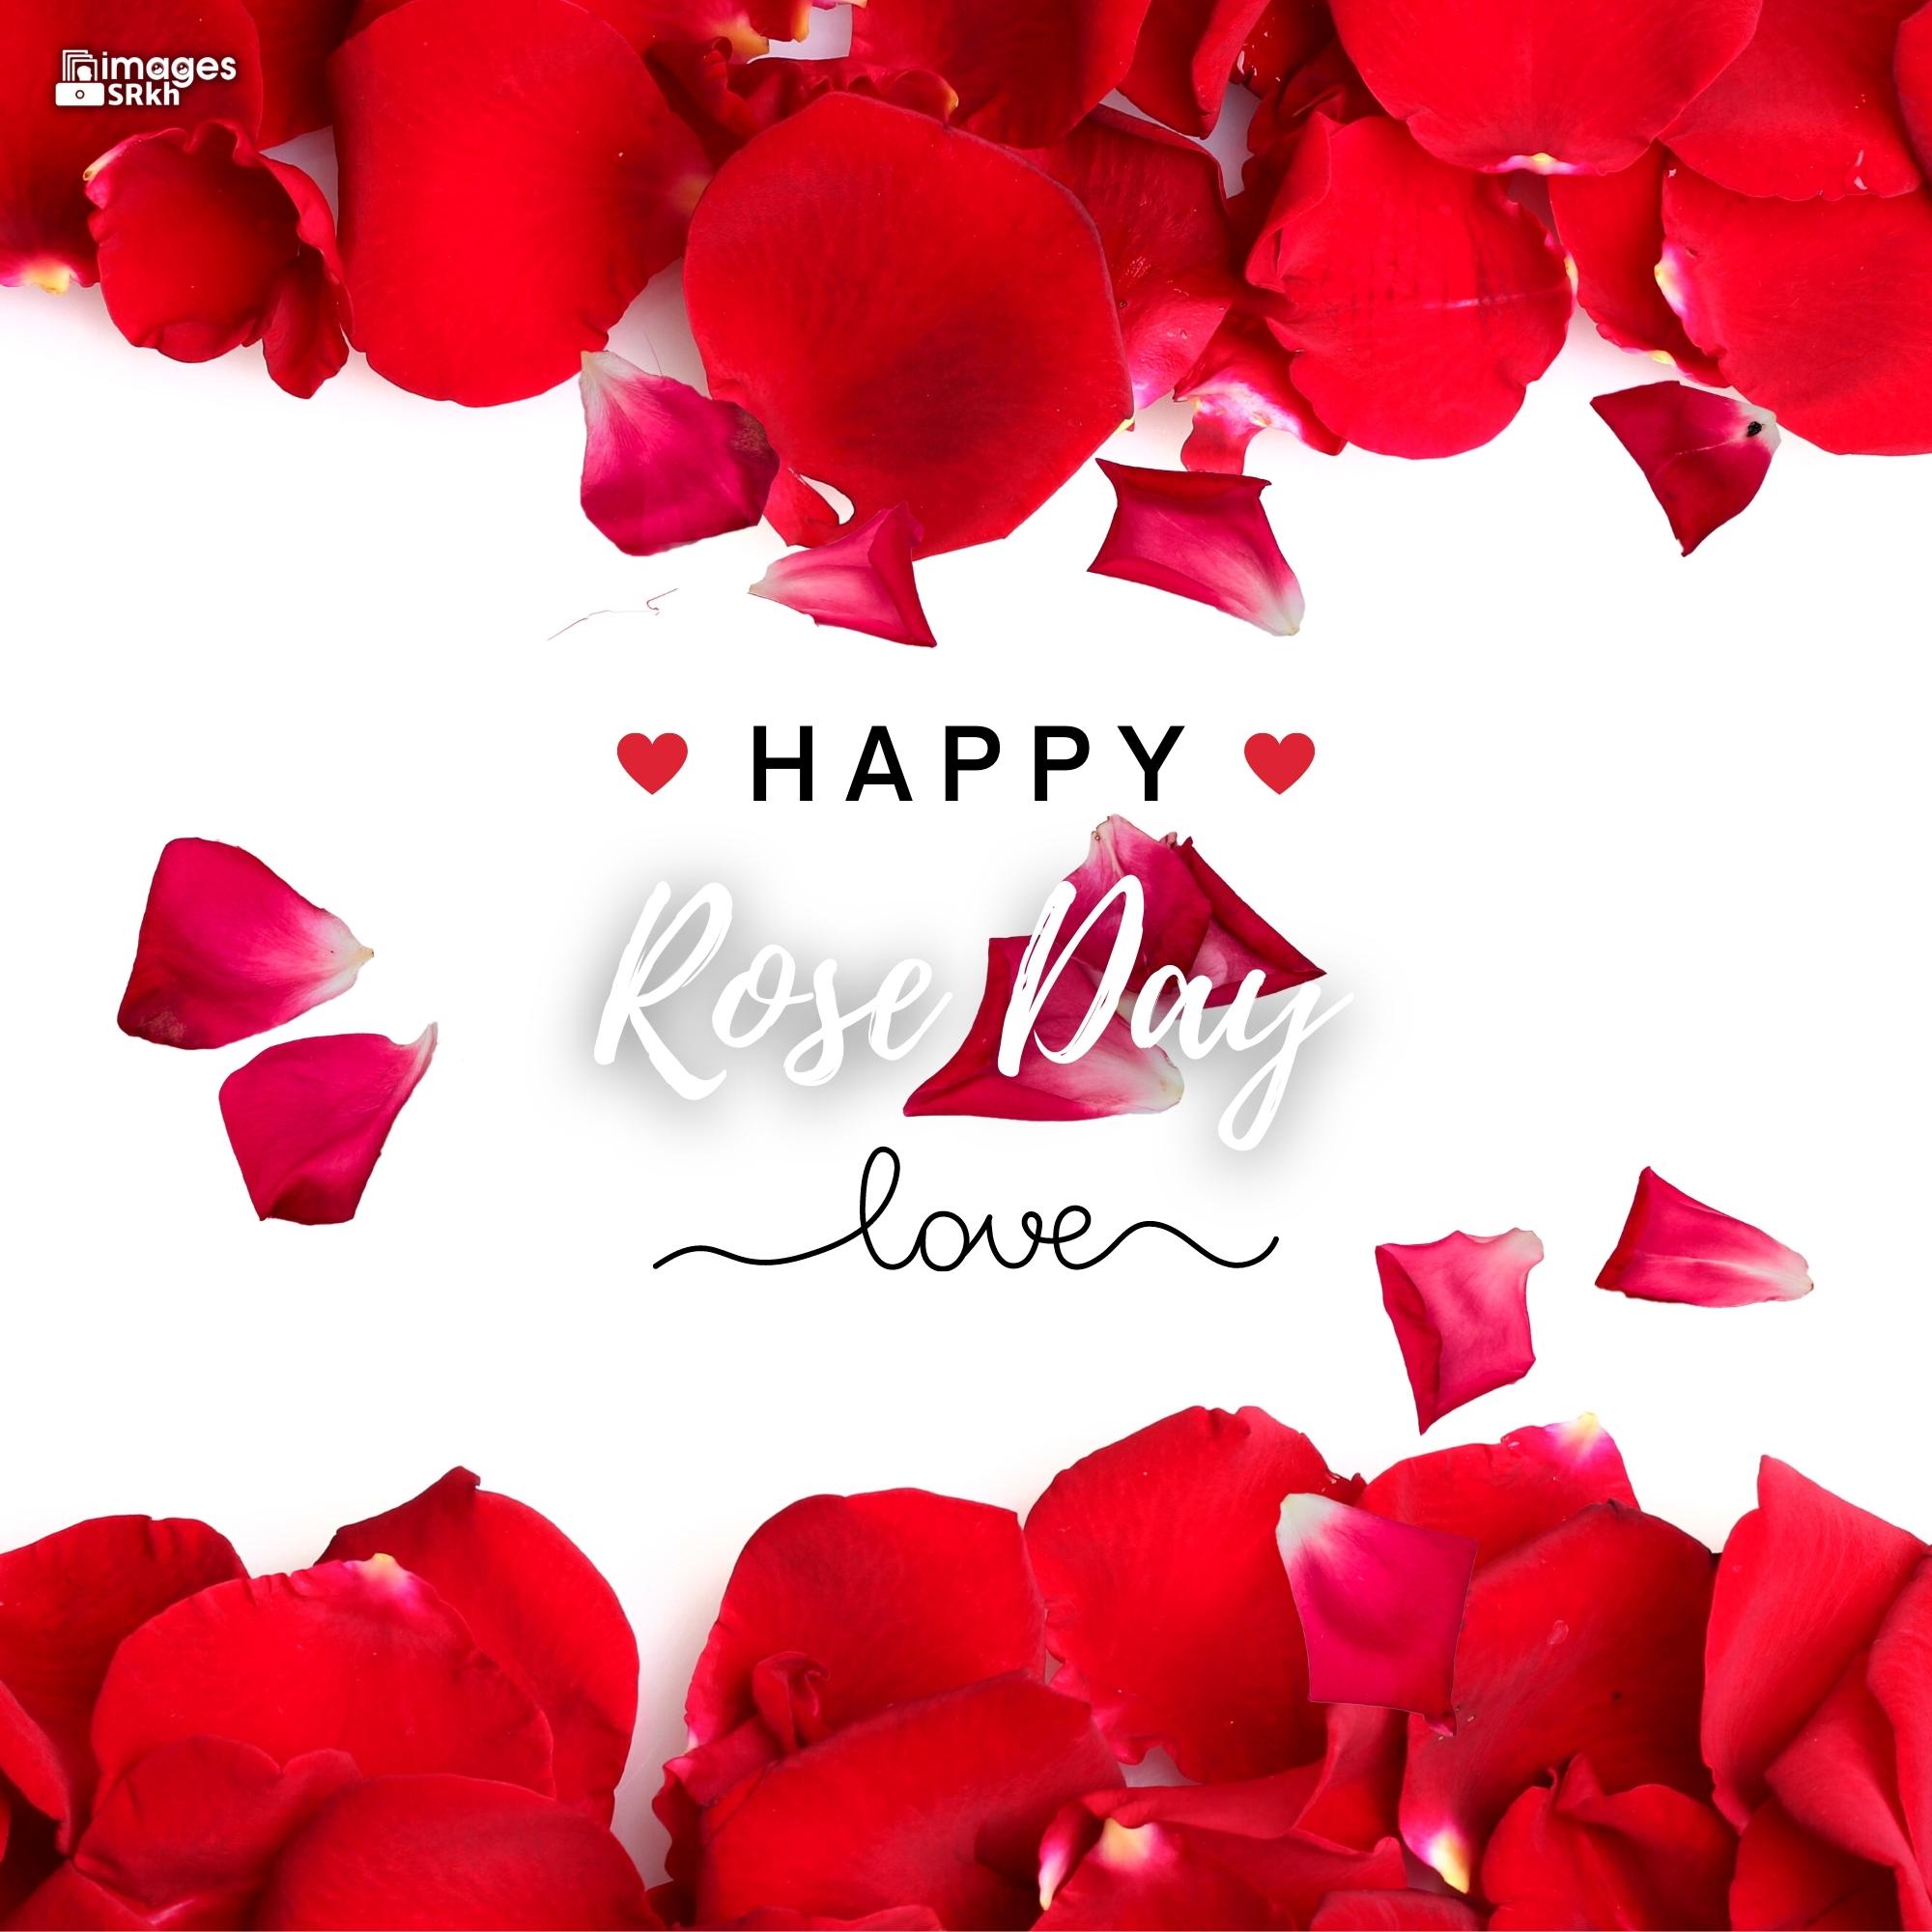 Happy Rose Day Image Hd Download (70)